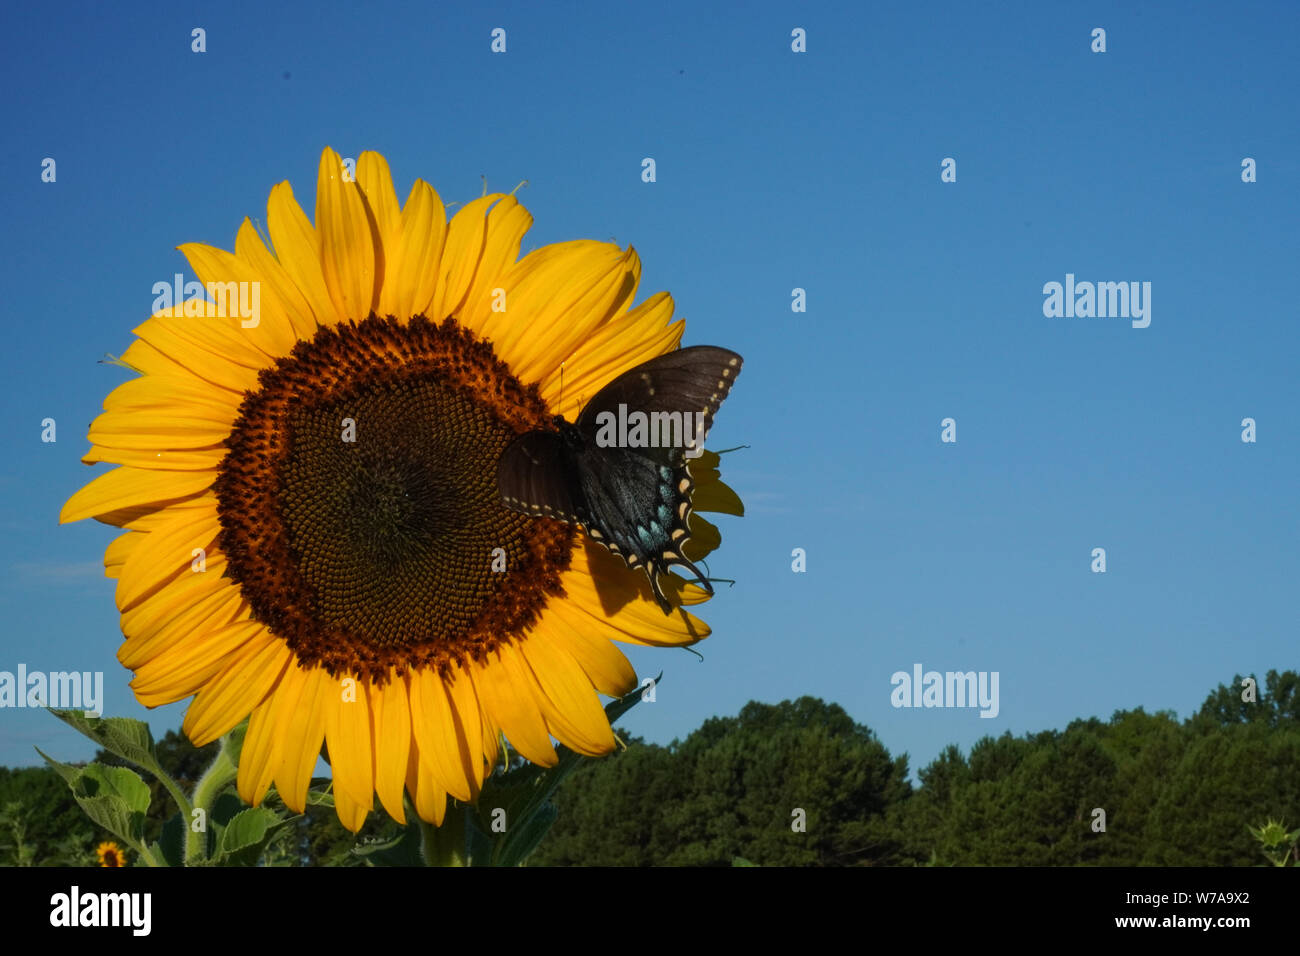 A butterfly lands on a sunflower in a field in summer with blue sky and space Stock Photo